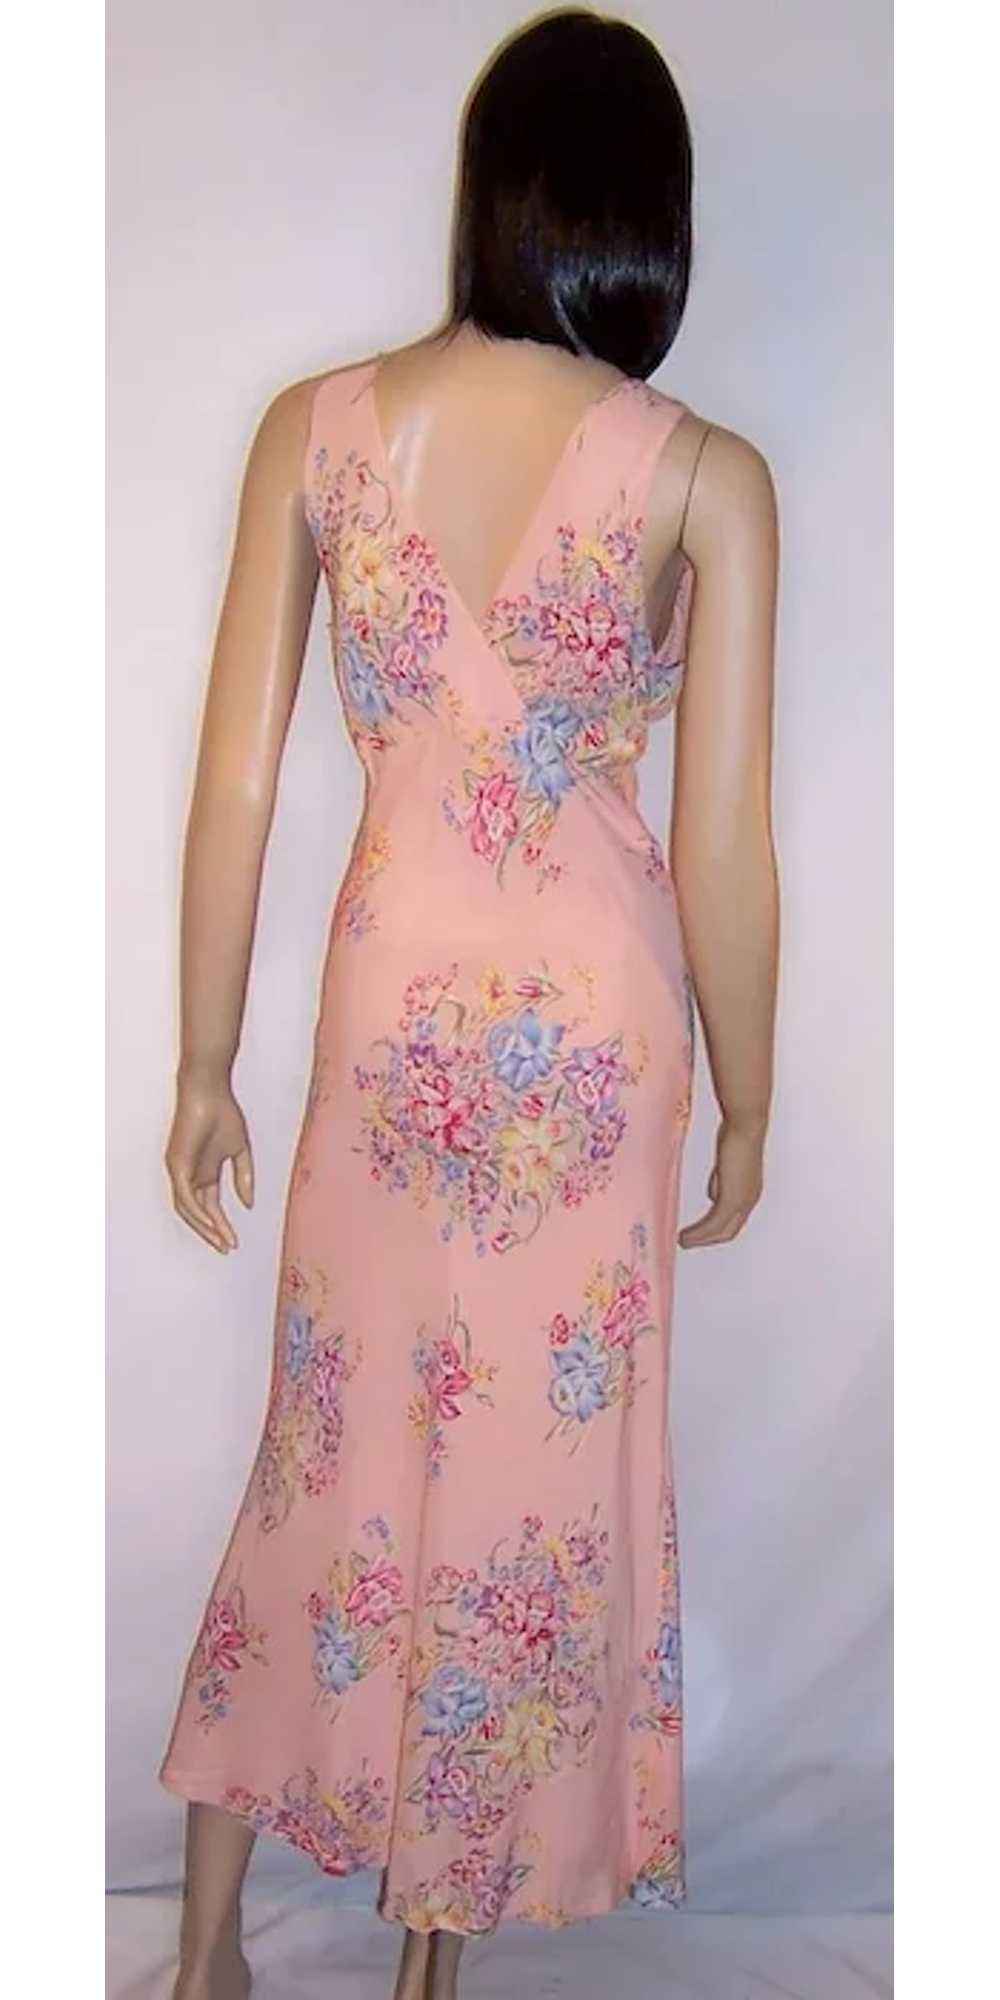 1930's Pink Negligee with Daffodil Floral Sprays - image 3